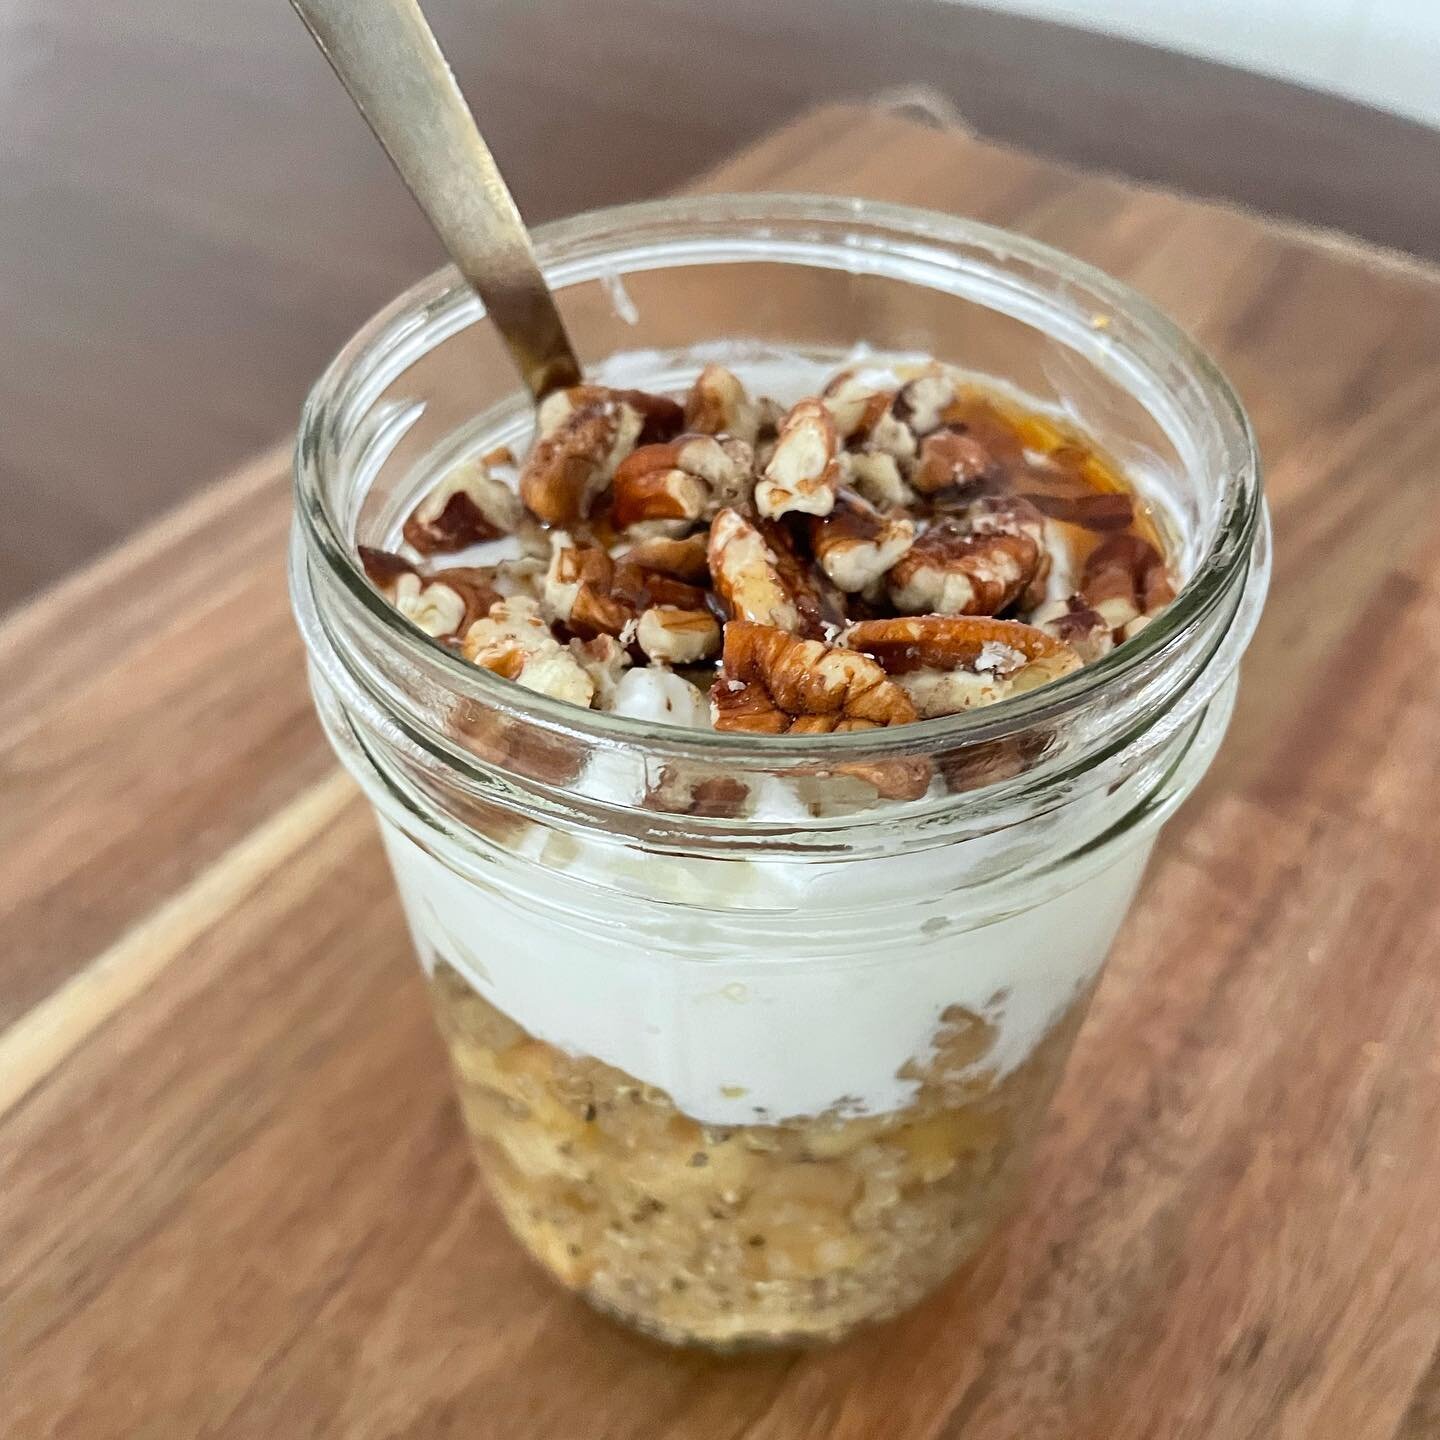 Apple Chia Quinoa Parfait 🍎

This make-ahead snack is made with the ideal match of carbs and protein to help you quickly recover from a day's ride or to keep you full between meals.

Featuring cooked quinoa, apples, chia seeds, cinnamon, and honey o